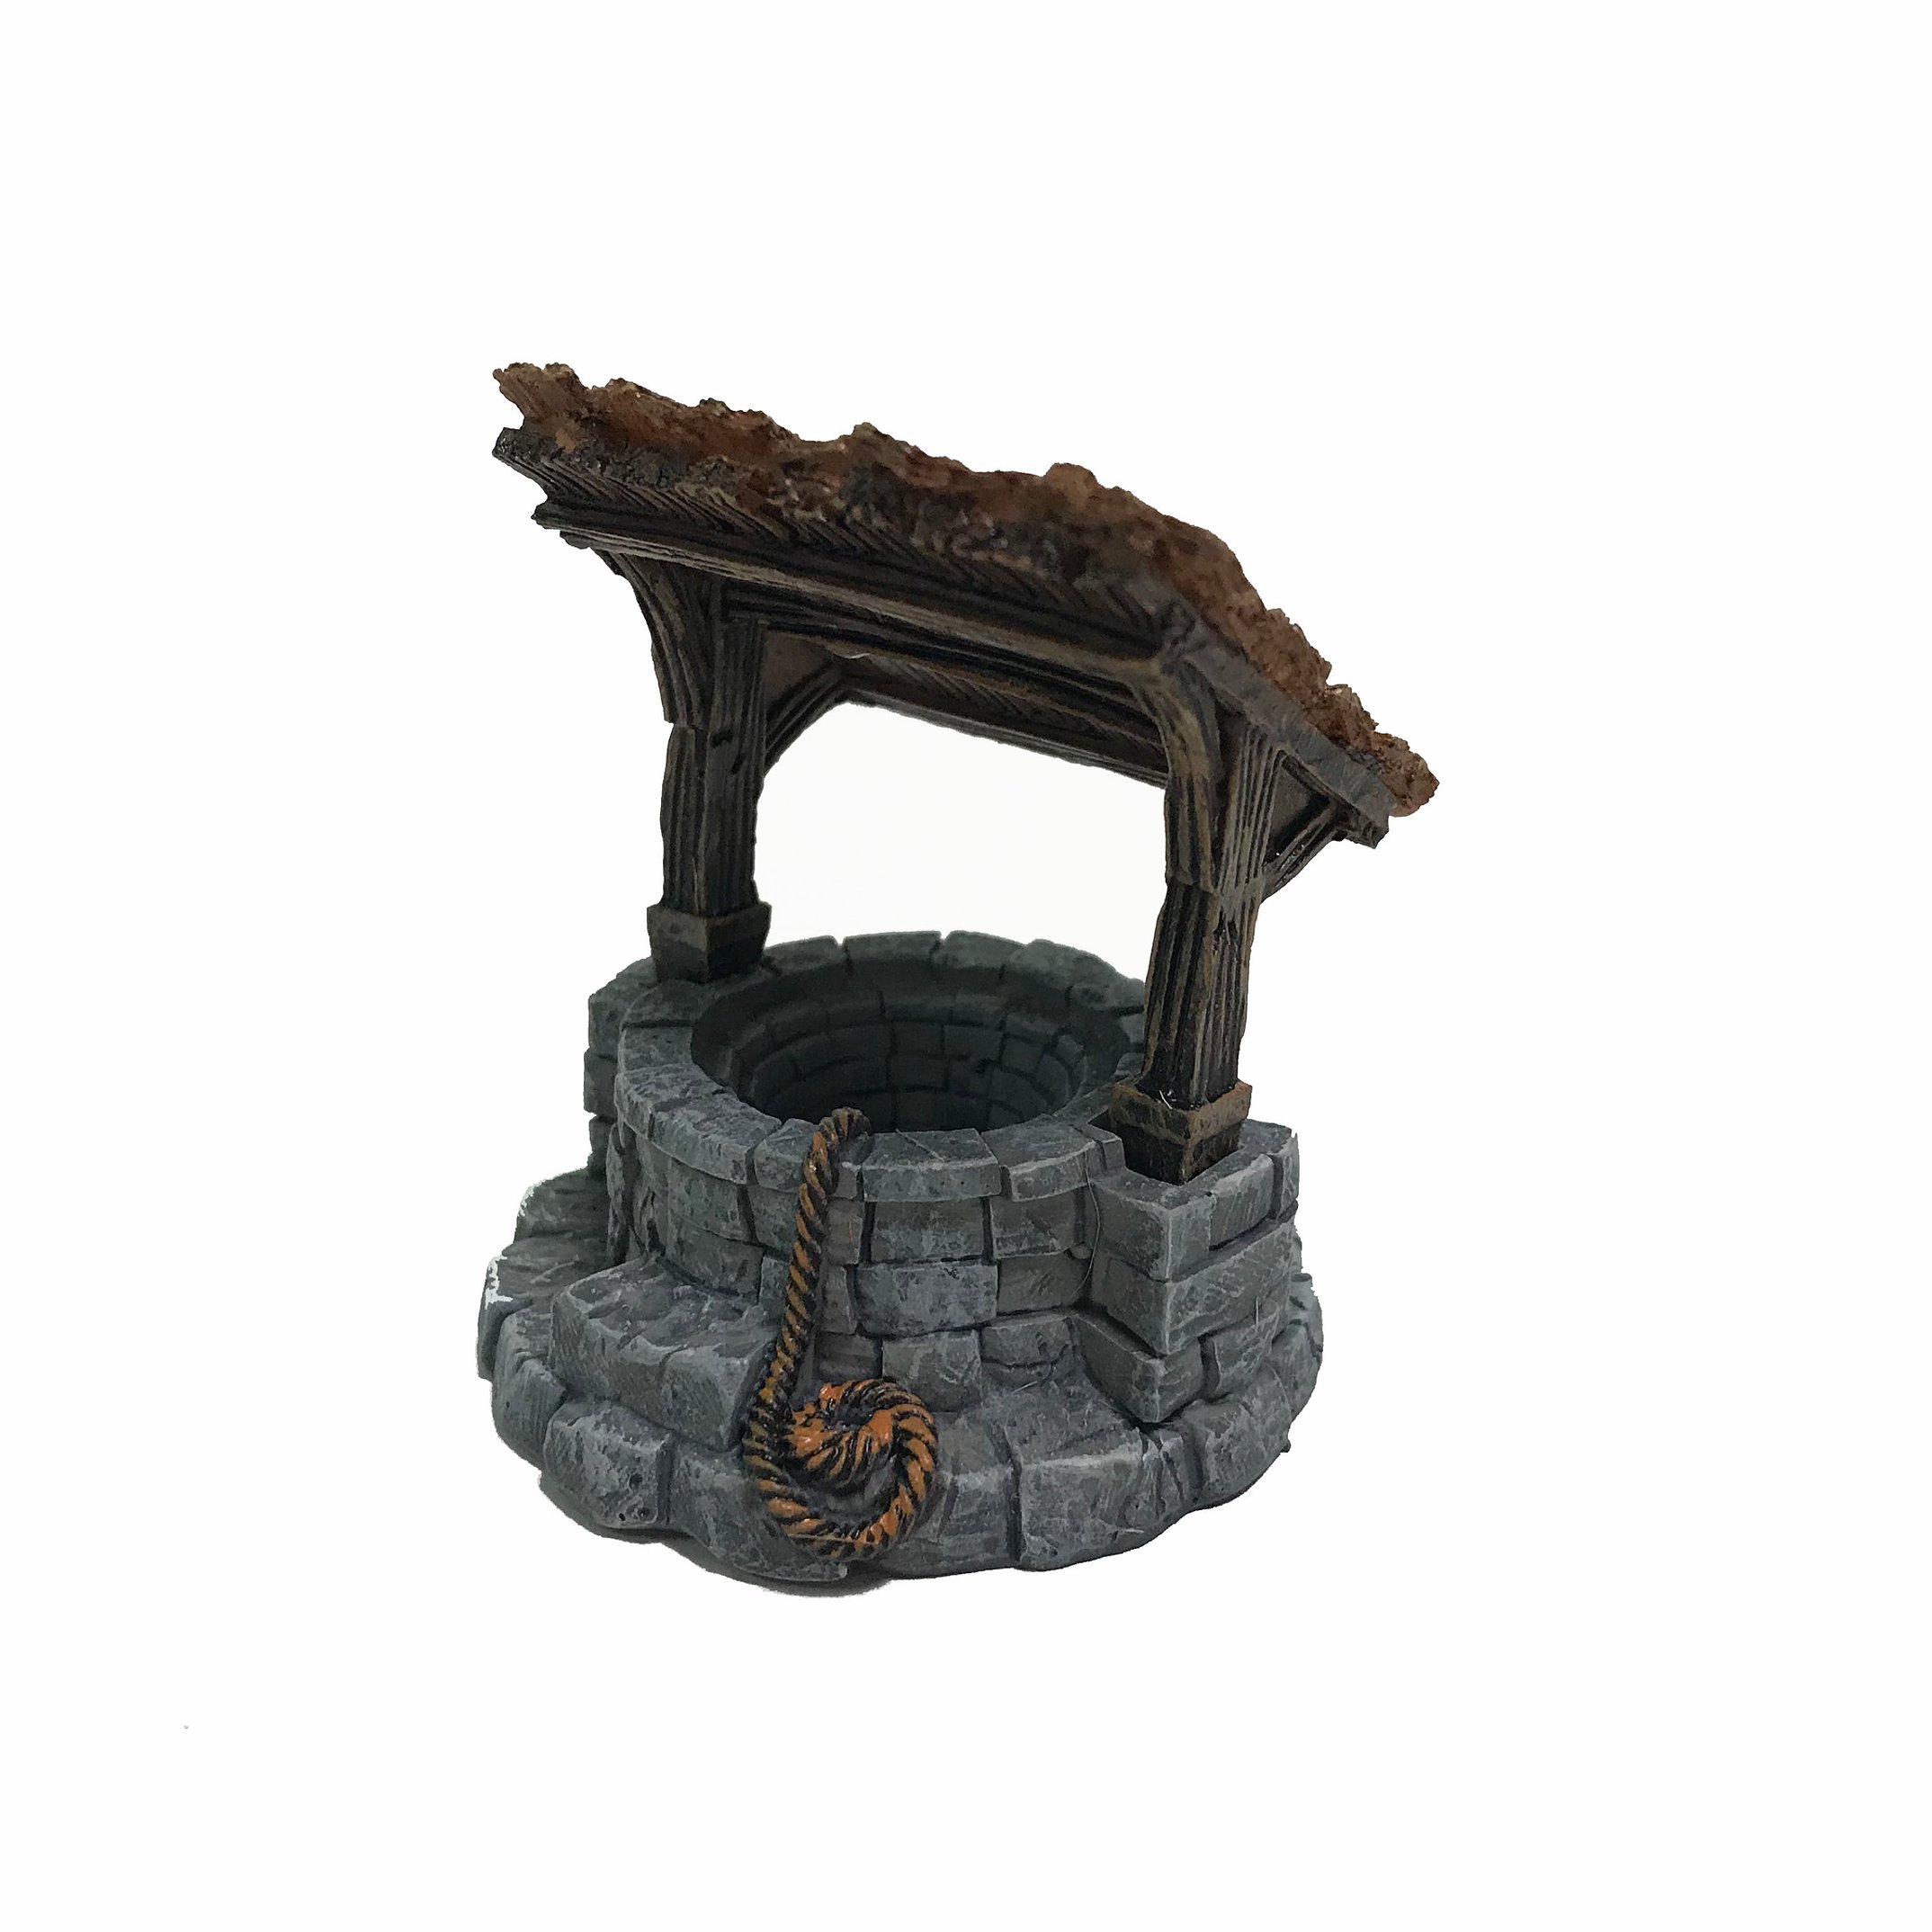 Village Well – Pre-painted Resin Scenery | Shiny Games